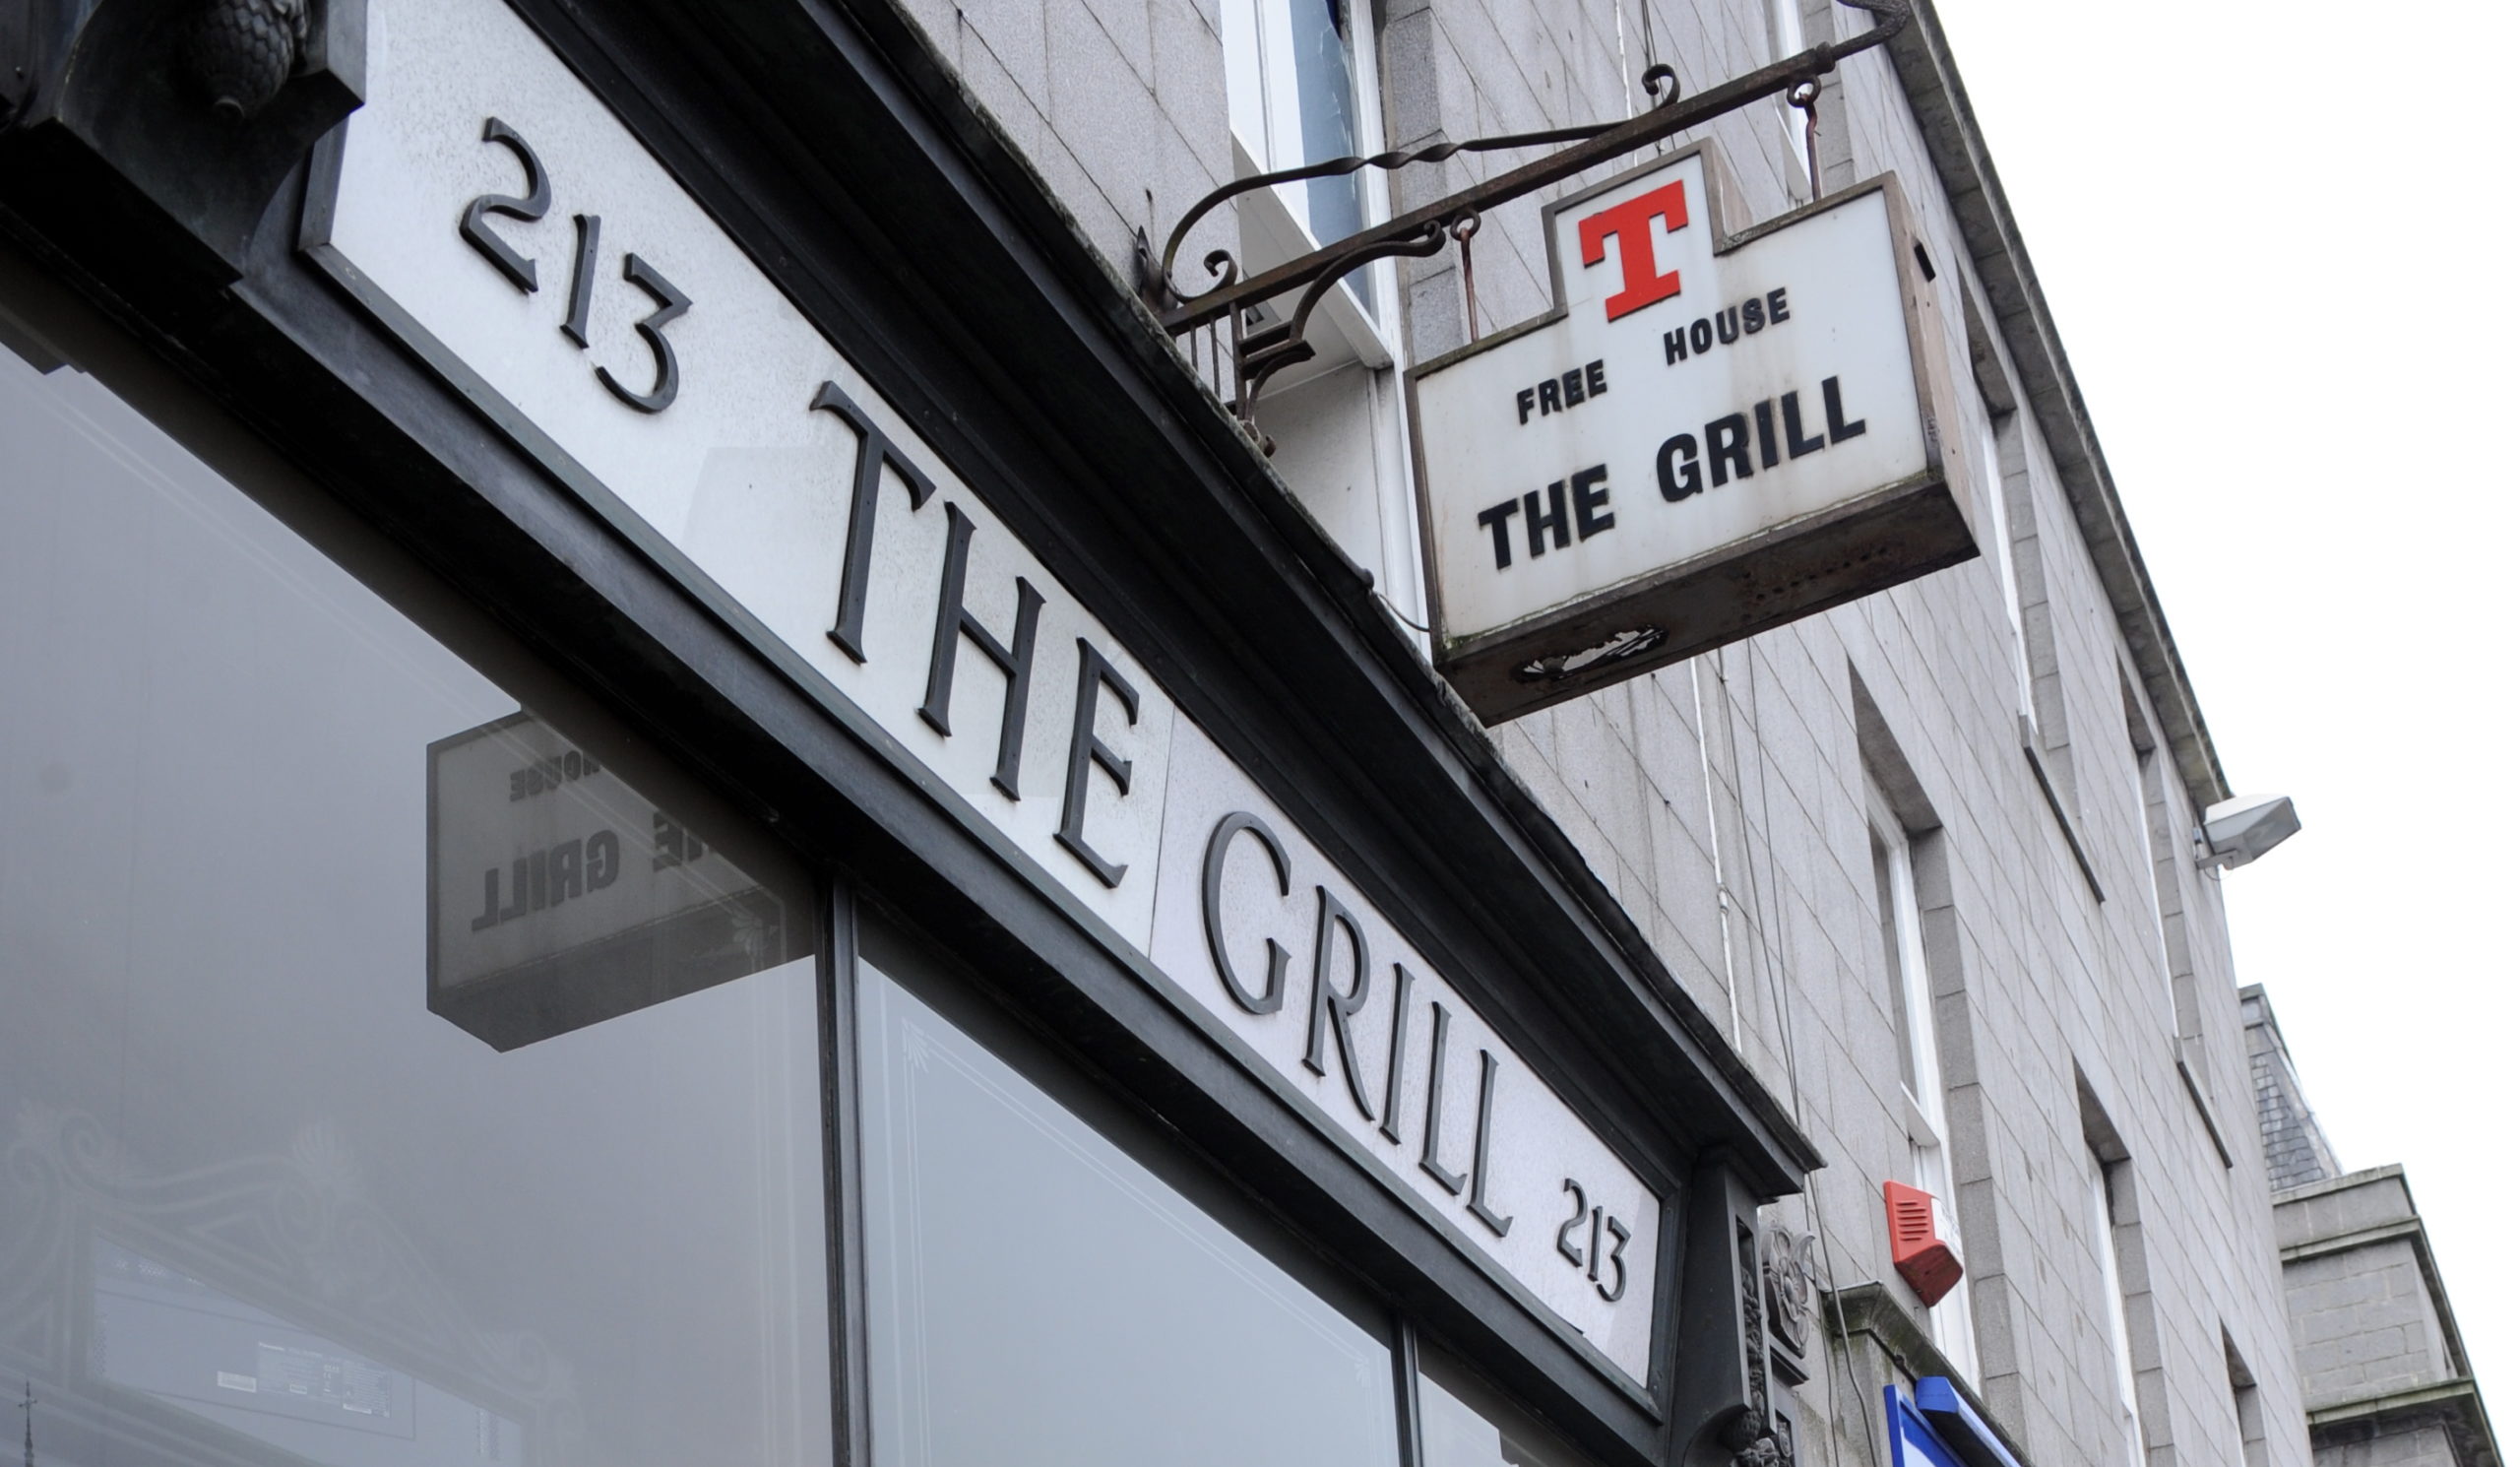 The Grill bar on Union Street.

Picture by Colin Rennie.